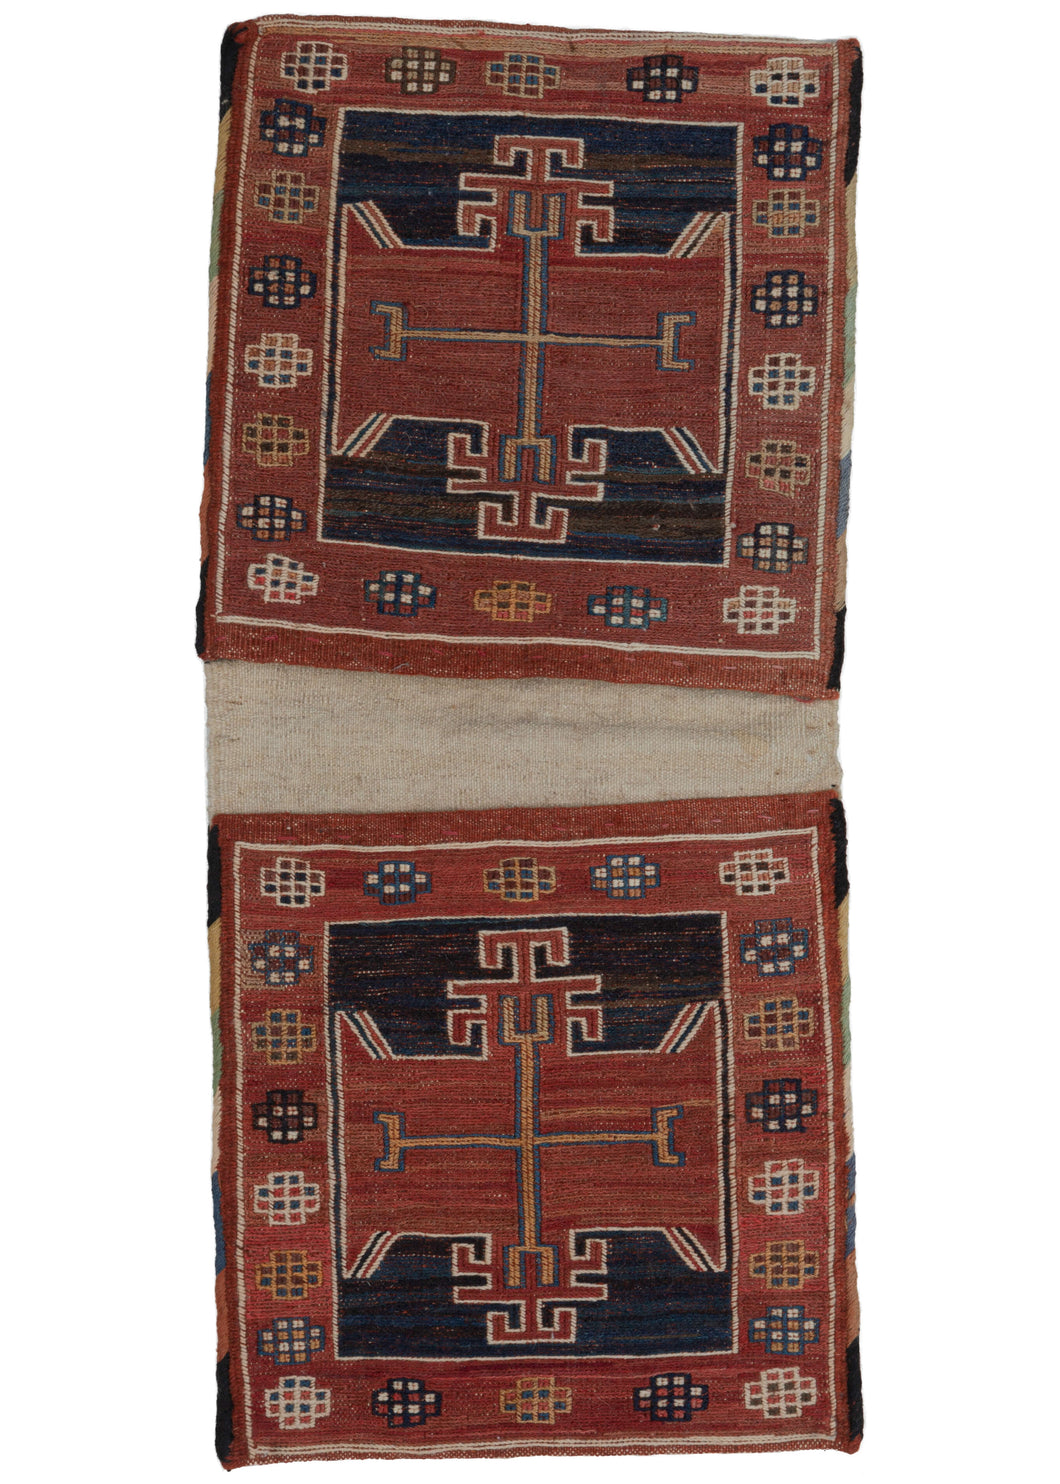 This Mid Century Caucasian Soumak Chanteh was constructed in soumak weave with a plain undyed flatwoven back with both faces featuring a red geometric rosette on a navy ground with a thin orange cruciform center.  Each bagface is framed with a border of simple rosettes composed of connected squares.